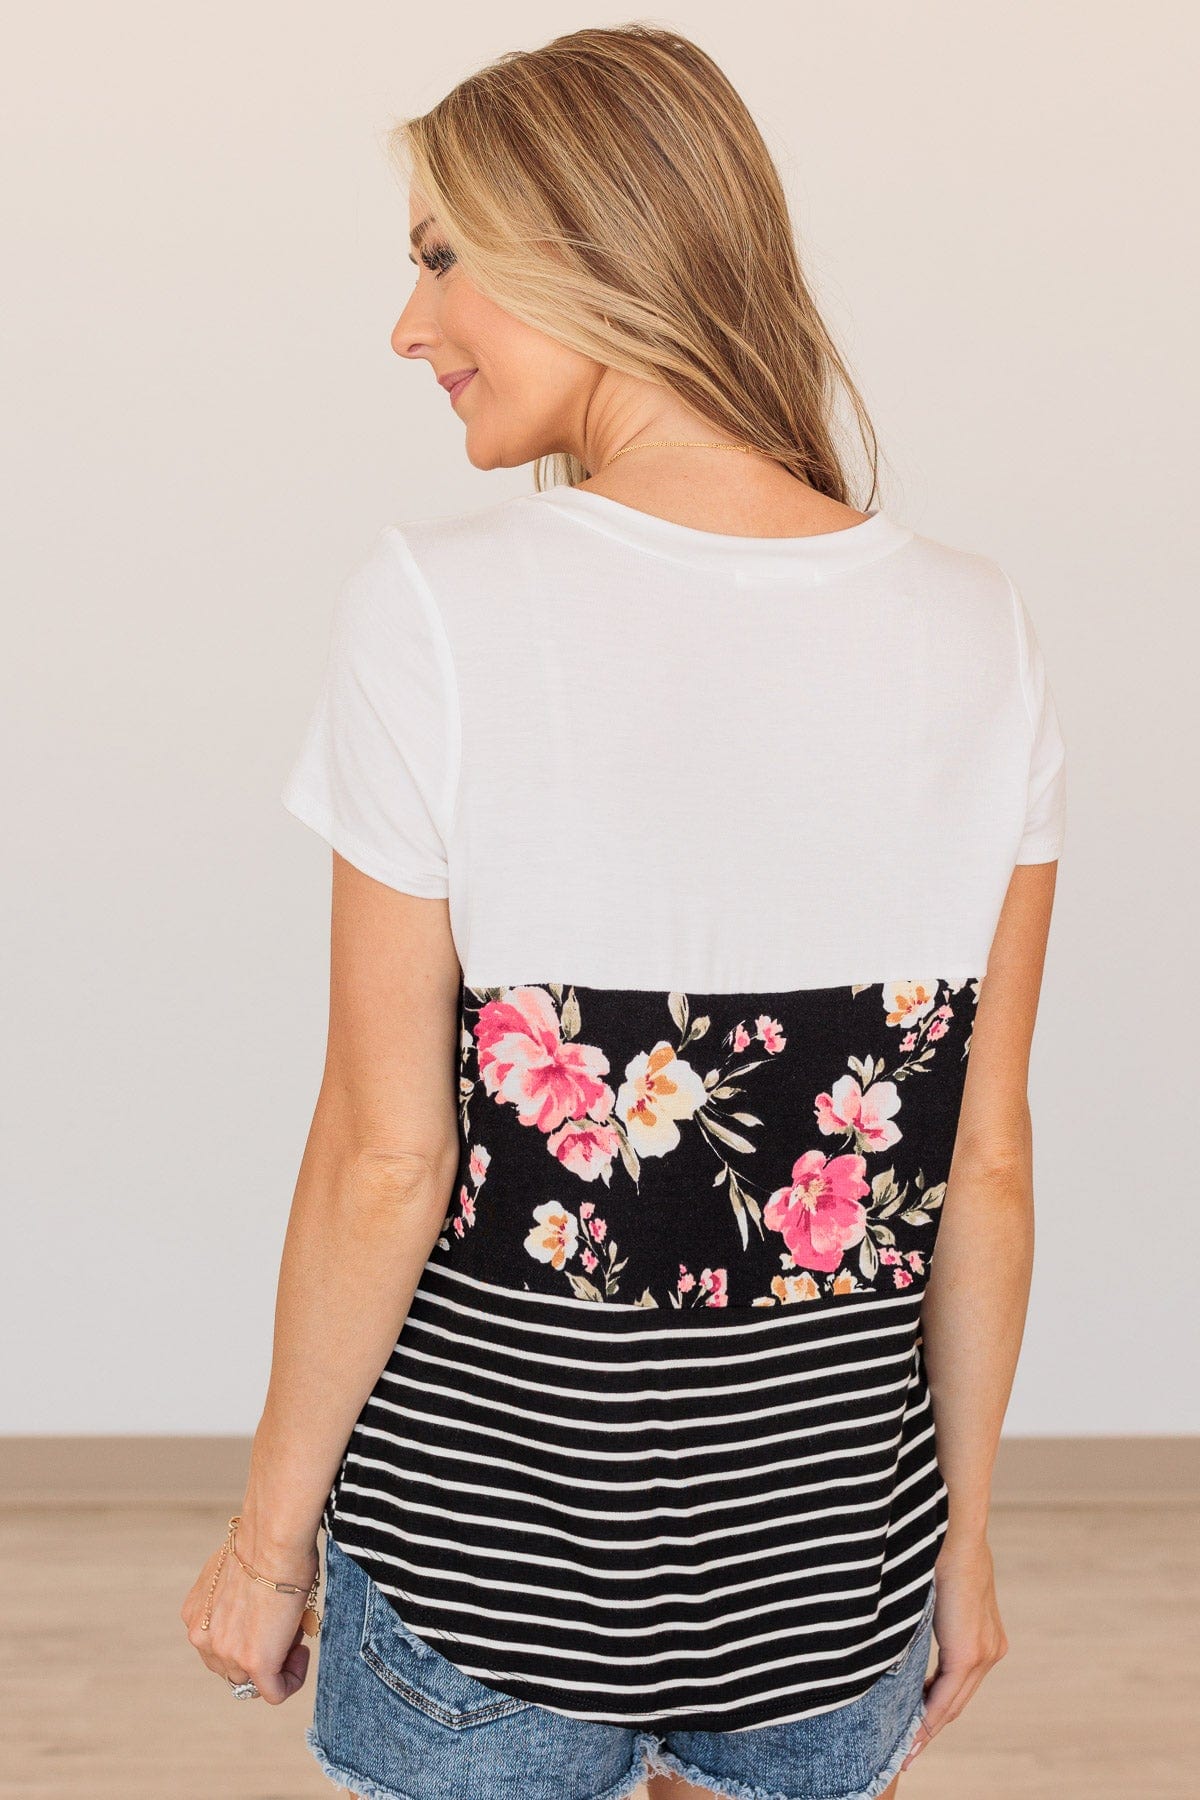 Days of Glory Patterned Top- White & Black